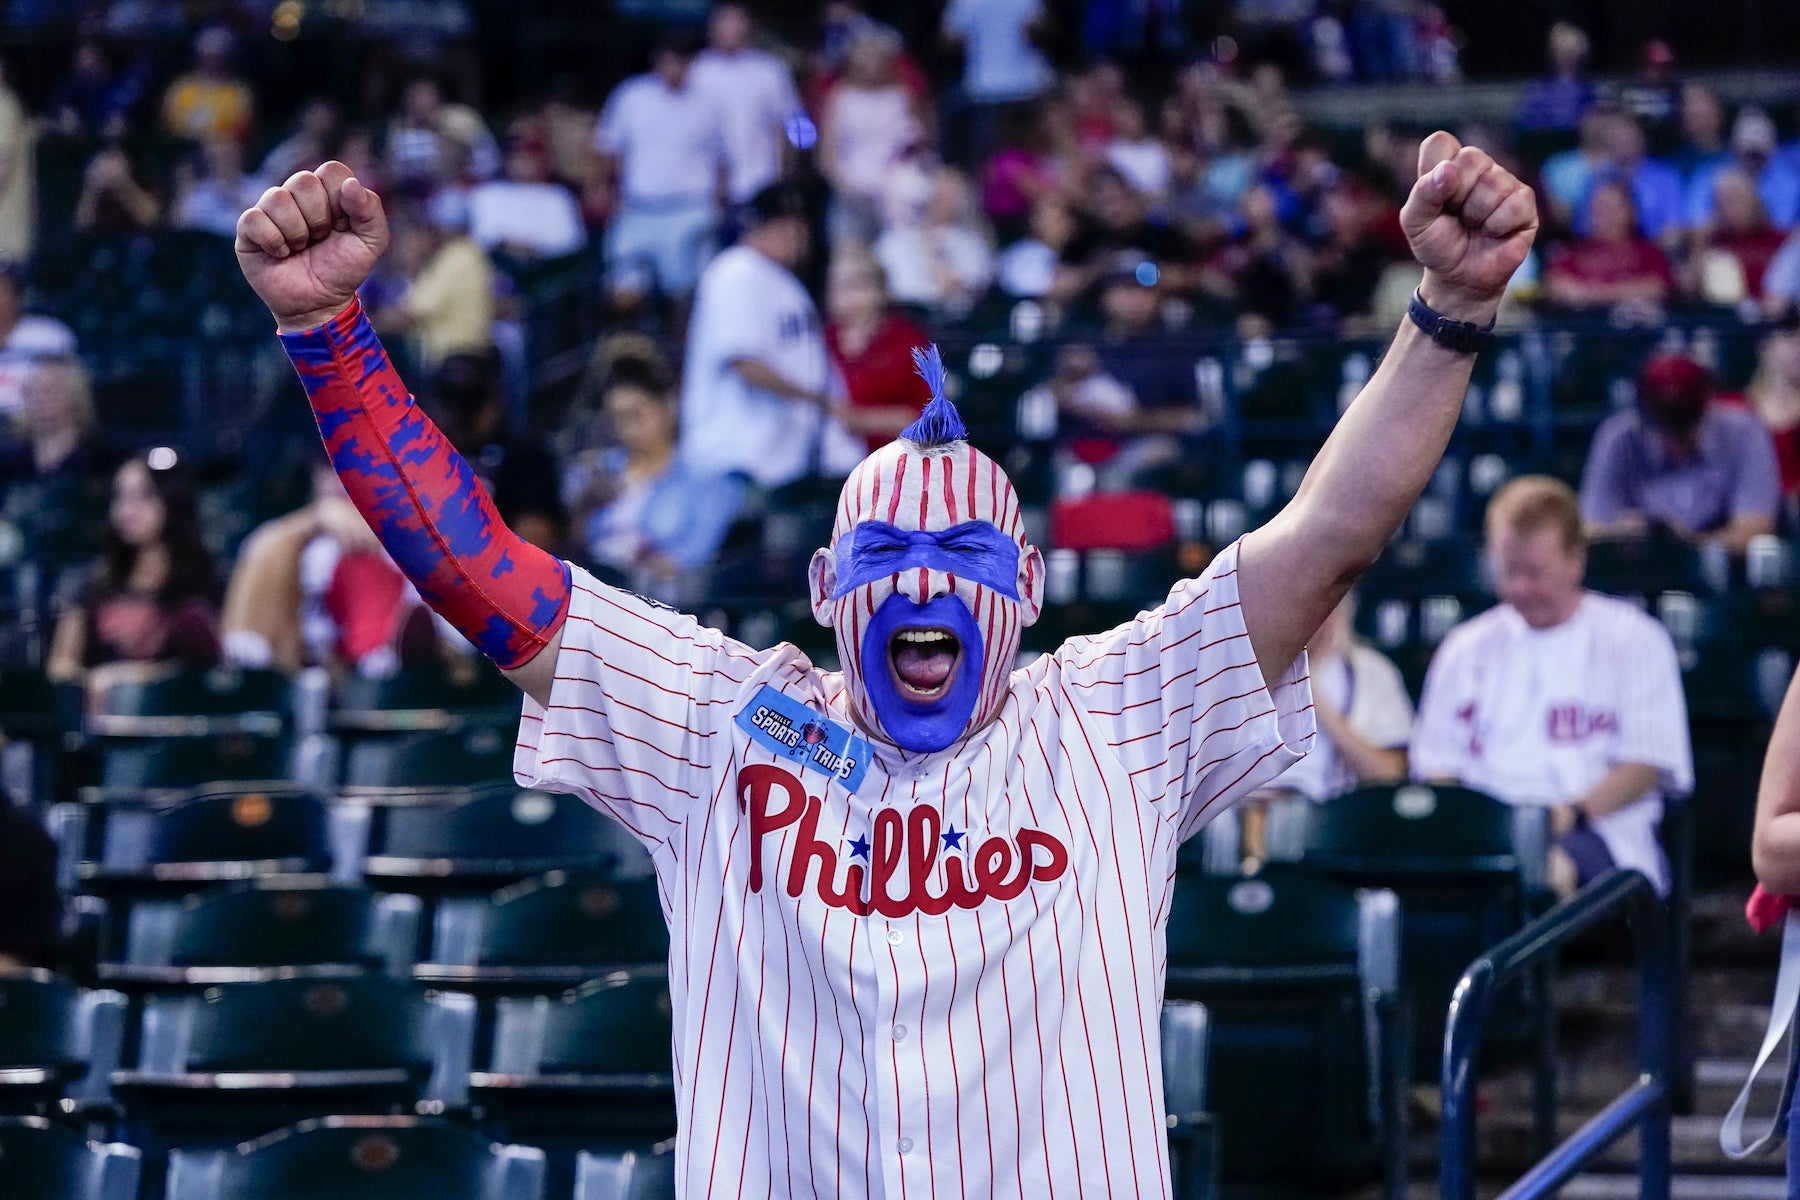 Phillies fans are ready for the World Series after NLCS win 